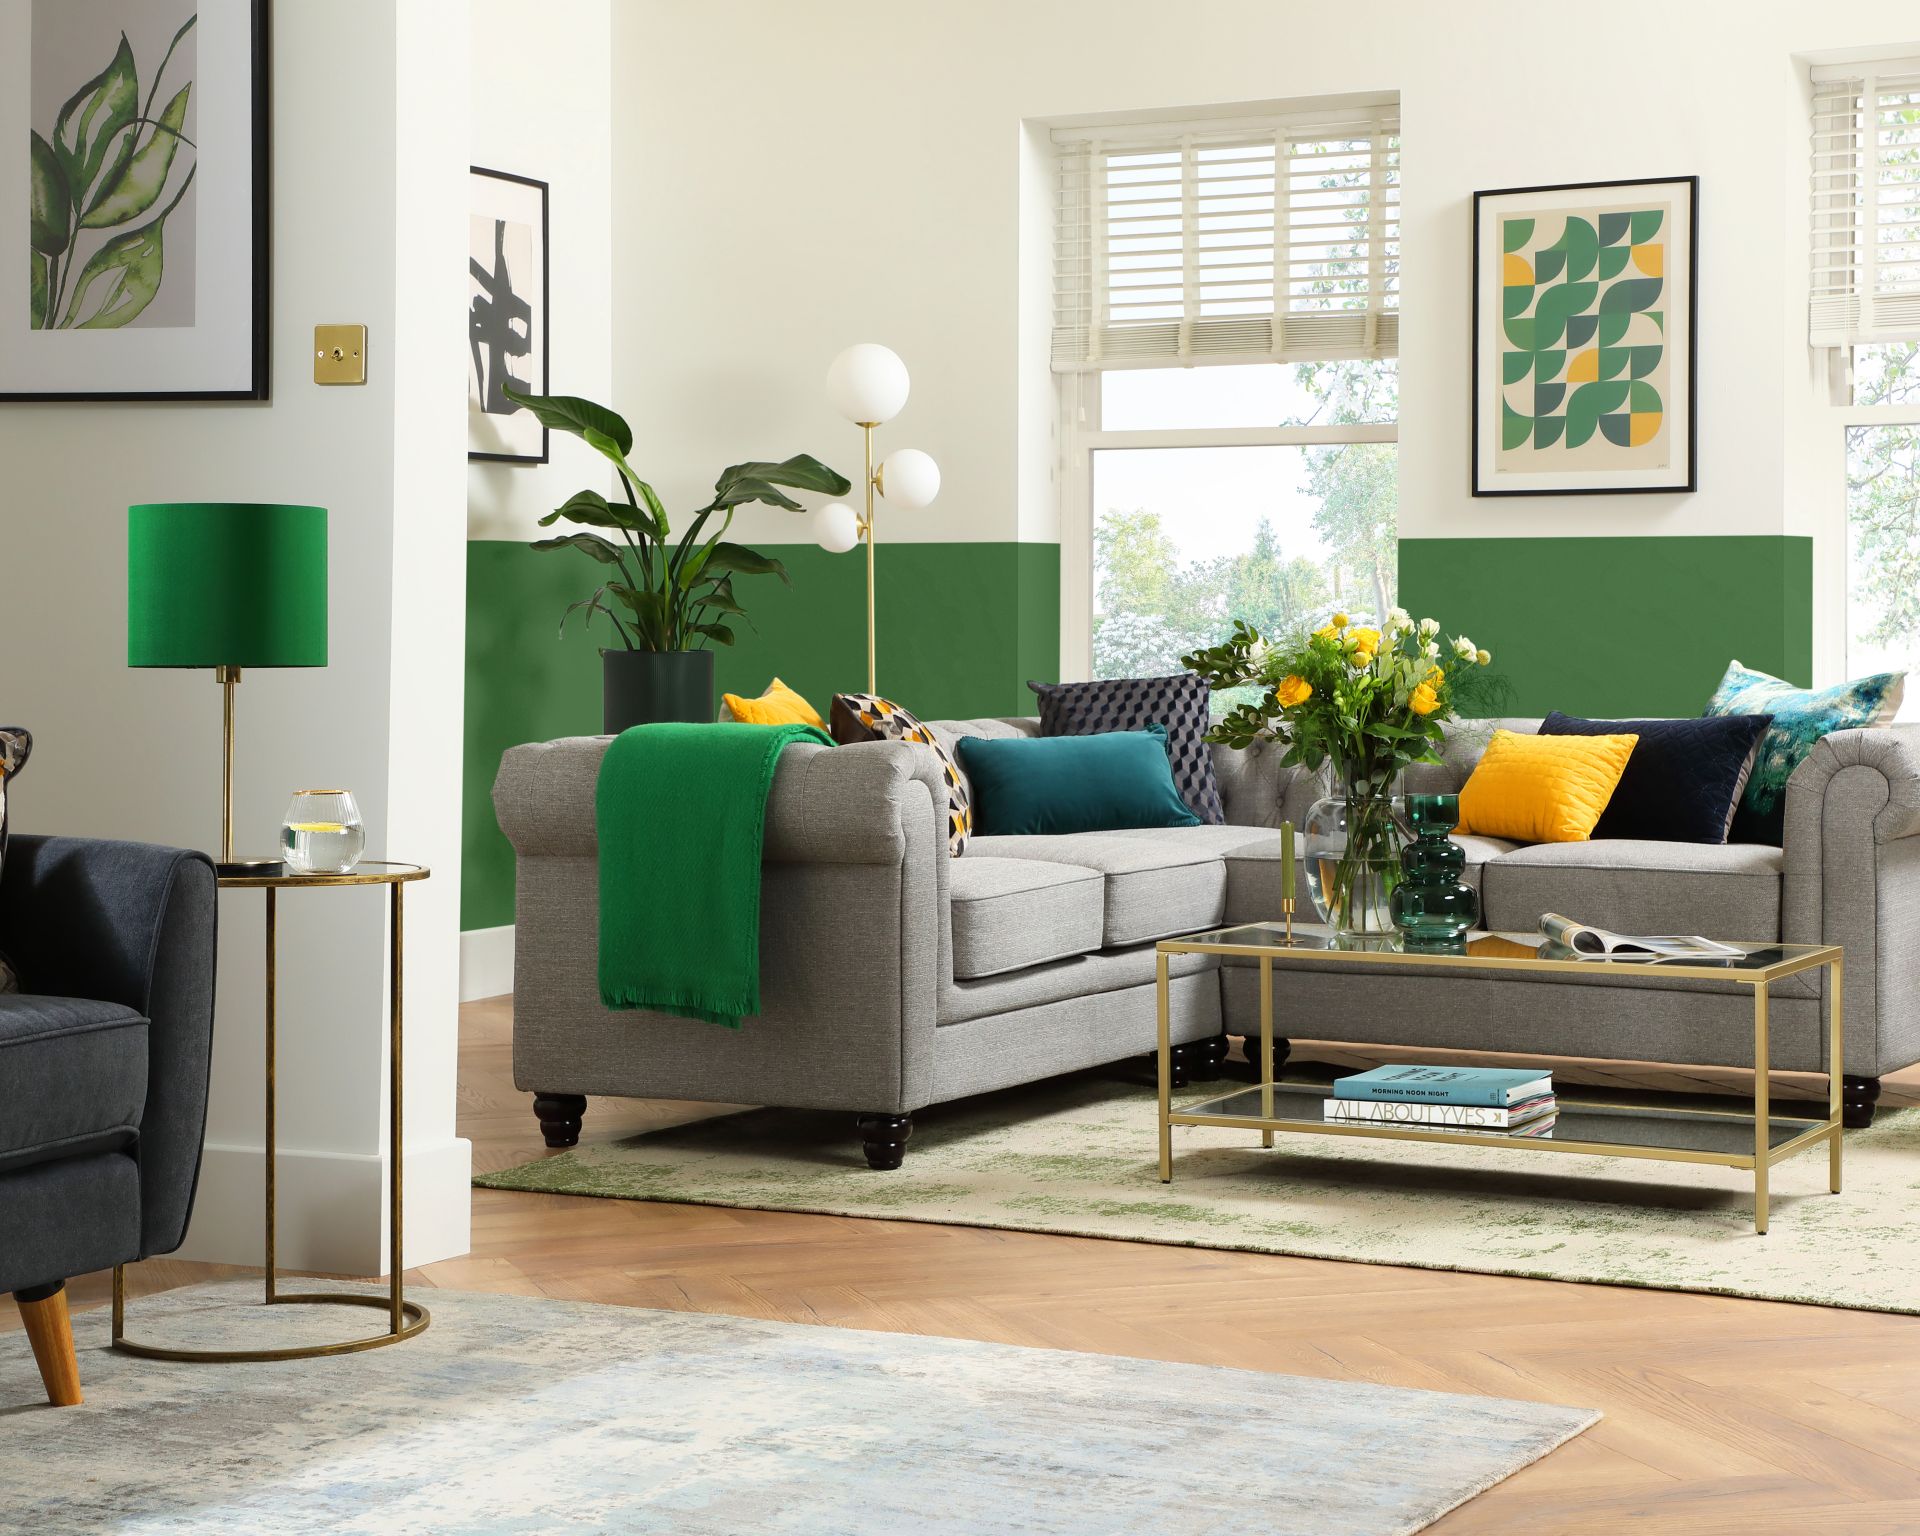 <p>                     'One of my personal favorite color combos is gray and green. Specifically, look for cool, mid-tone grays with blue undertones and cooler green hues (pistachio, light olive, etc) as well. This combination adds naturalism and freshness to whatever space it is in,' says Kazimierski.                   </p>                                      <p>                     'My go-to colors to pair with gray in home decor are shades of green,' says Leonard Ang, CEO at iPropertyManagement. 'It provides a sharp, clean effect, and the contrast between a charcoal grey and a bright green can really pop if the green is used in moderation.'                   </p>                                      <p>                     A grey sofa is a perfect base from which to go experimental with your wall color. Painting the lower half of your wall a bright color is a great way to ease your way into a more vibrant shade, as it doesn't overwhelm the whole room.                   </p>